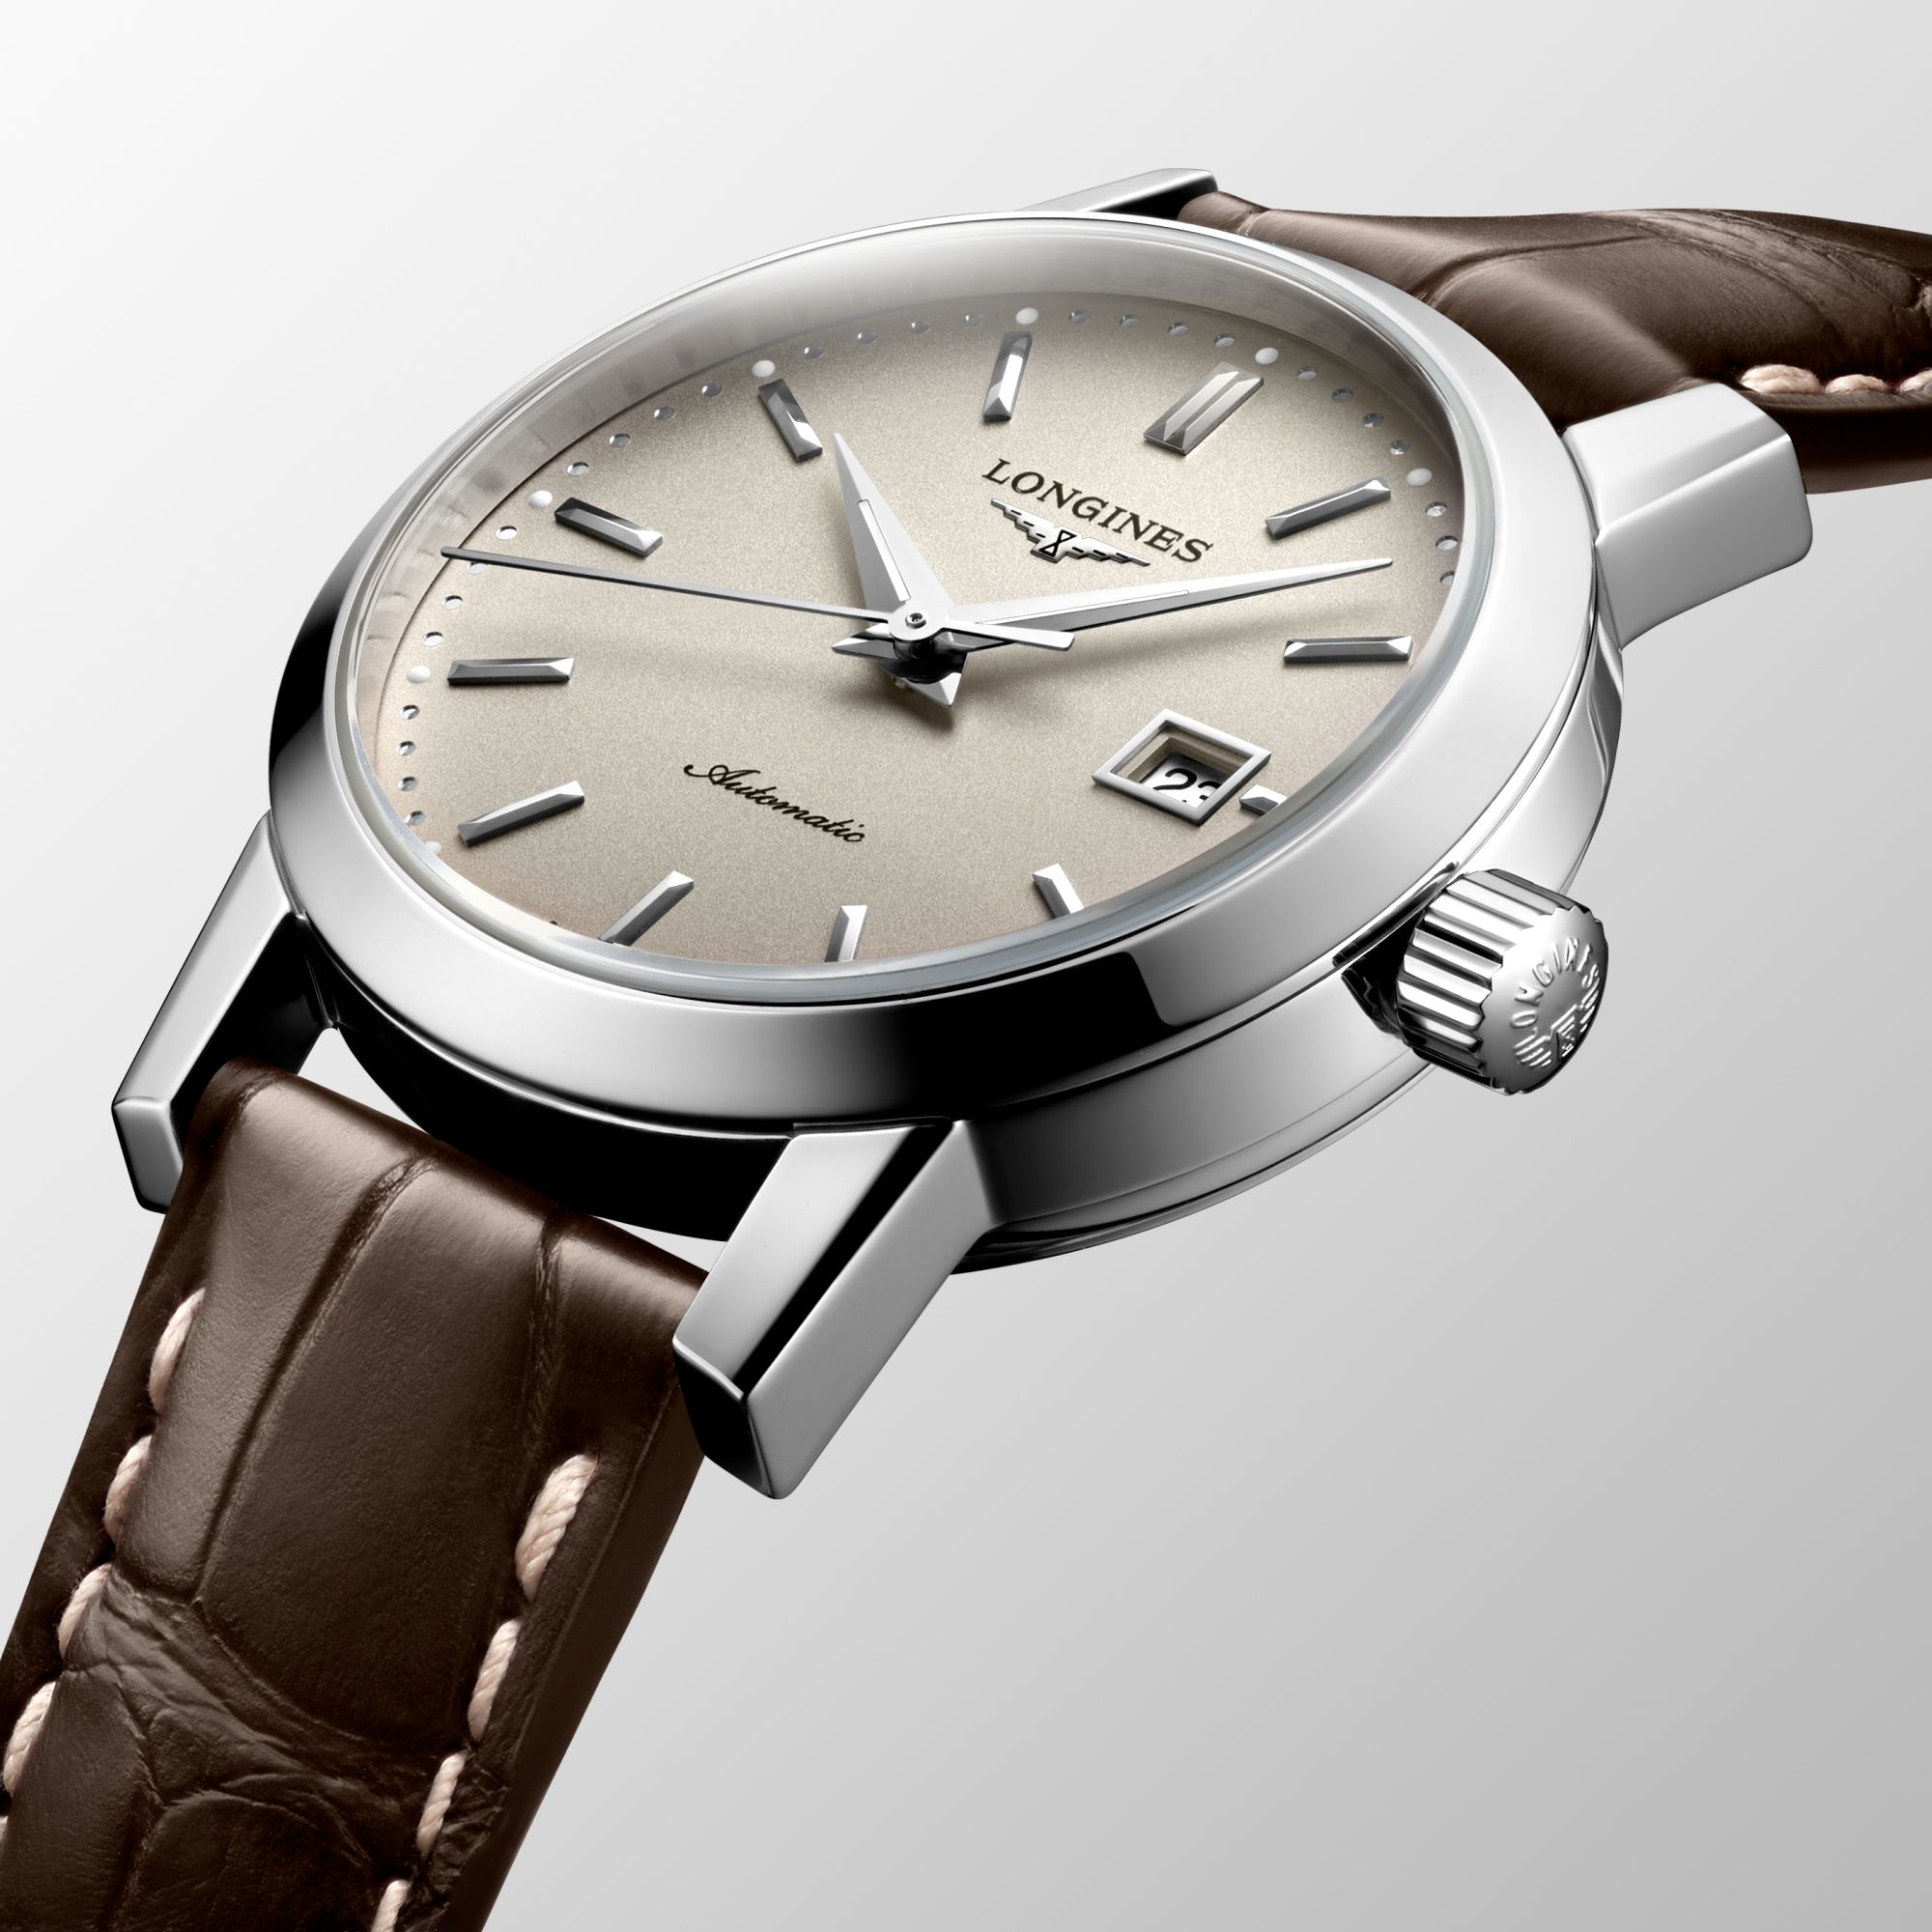 The Longines 1832 Watchmaking Tradition Référence :  L4.325.4.92.2 -2